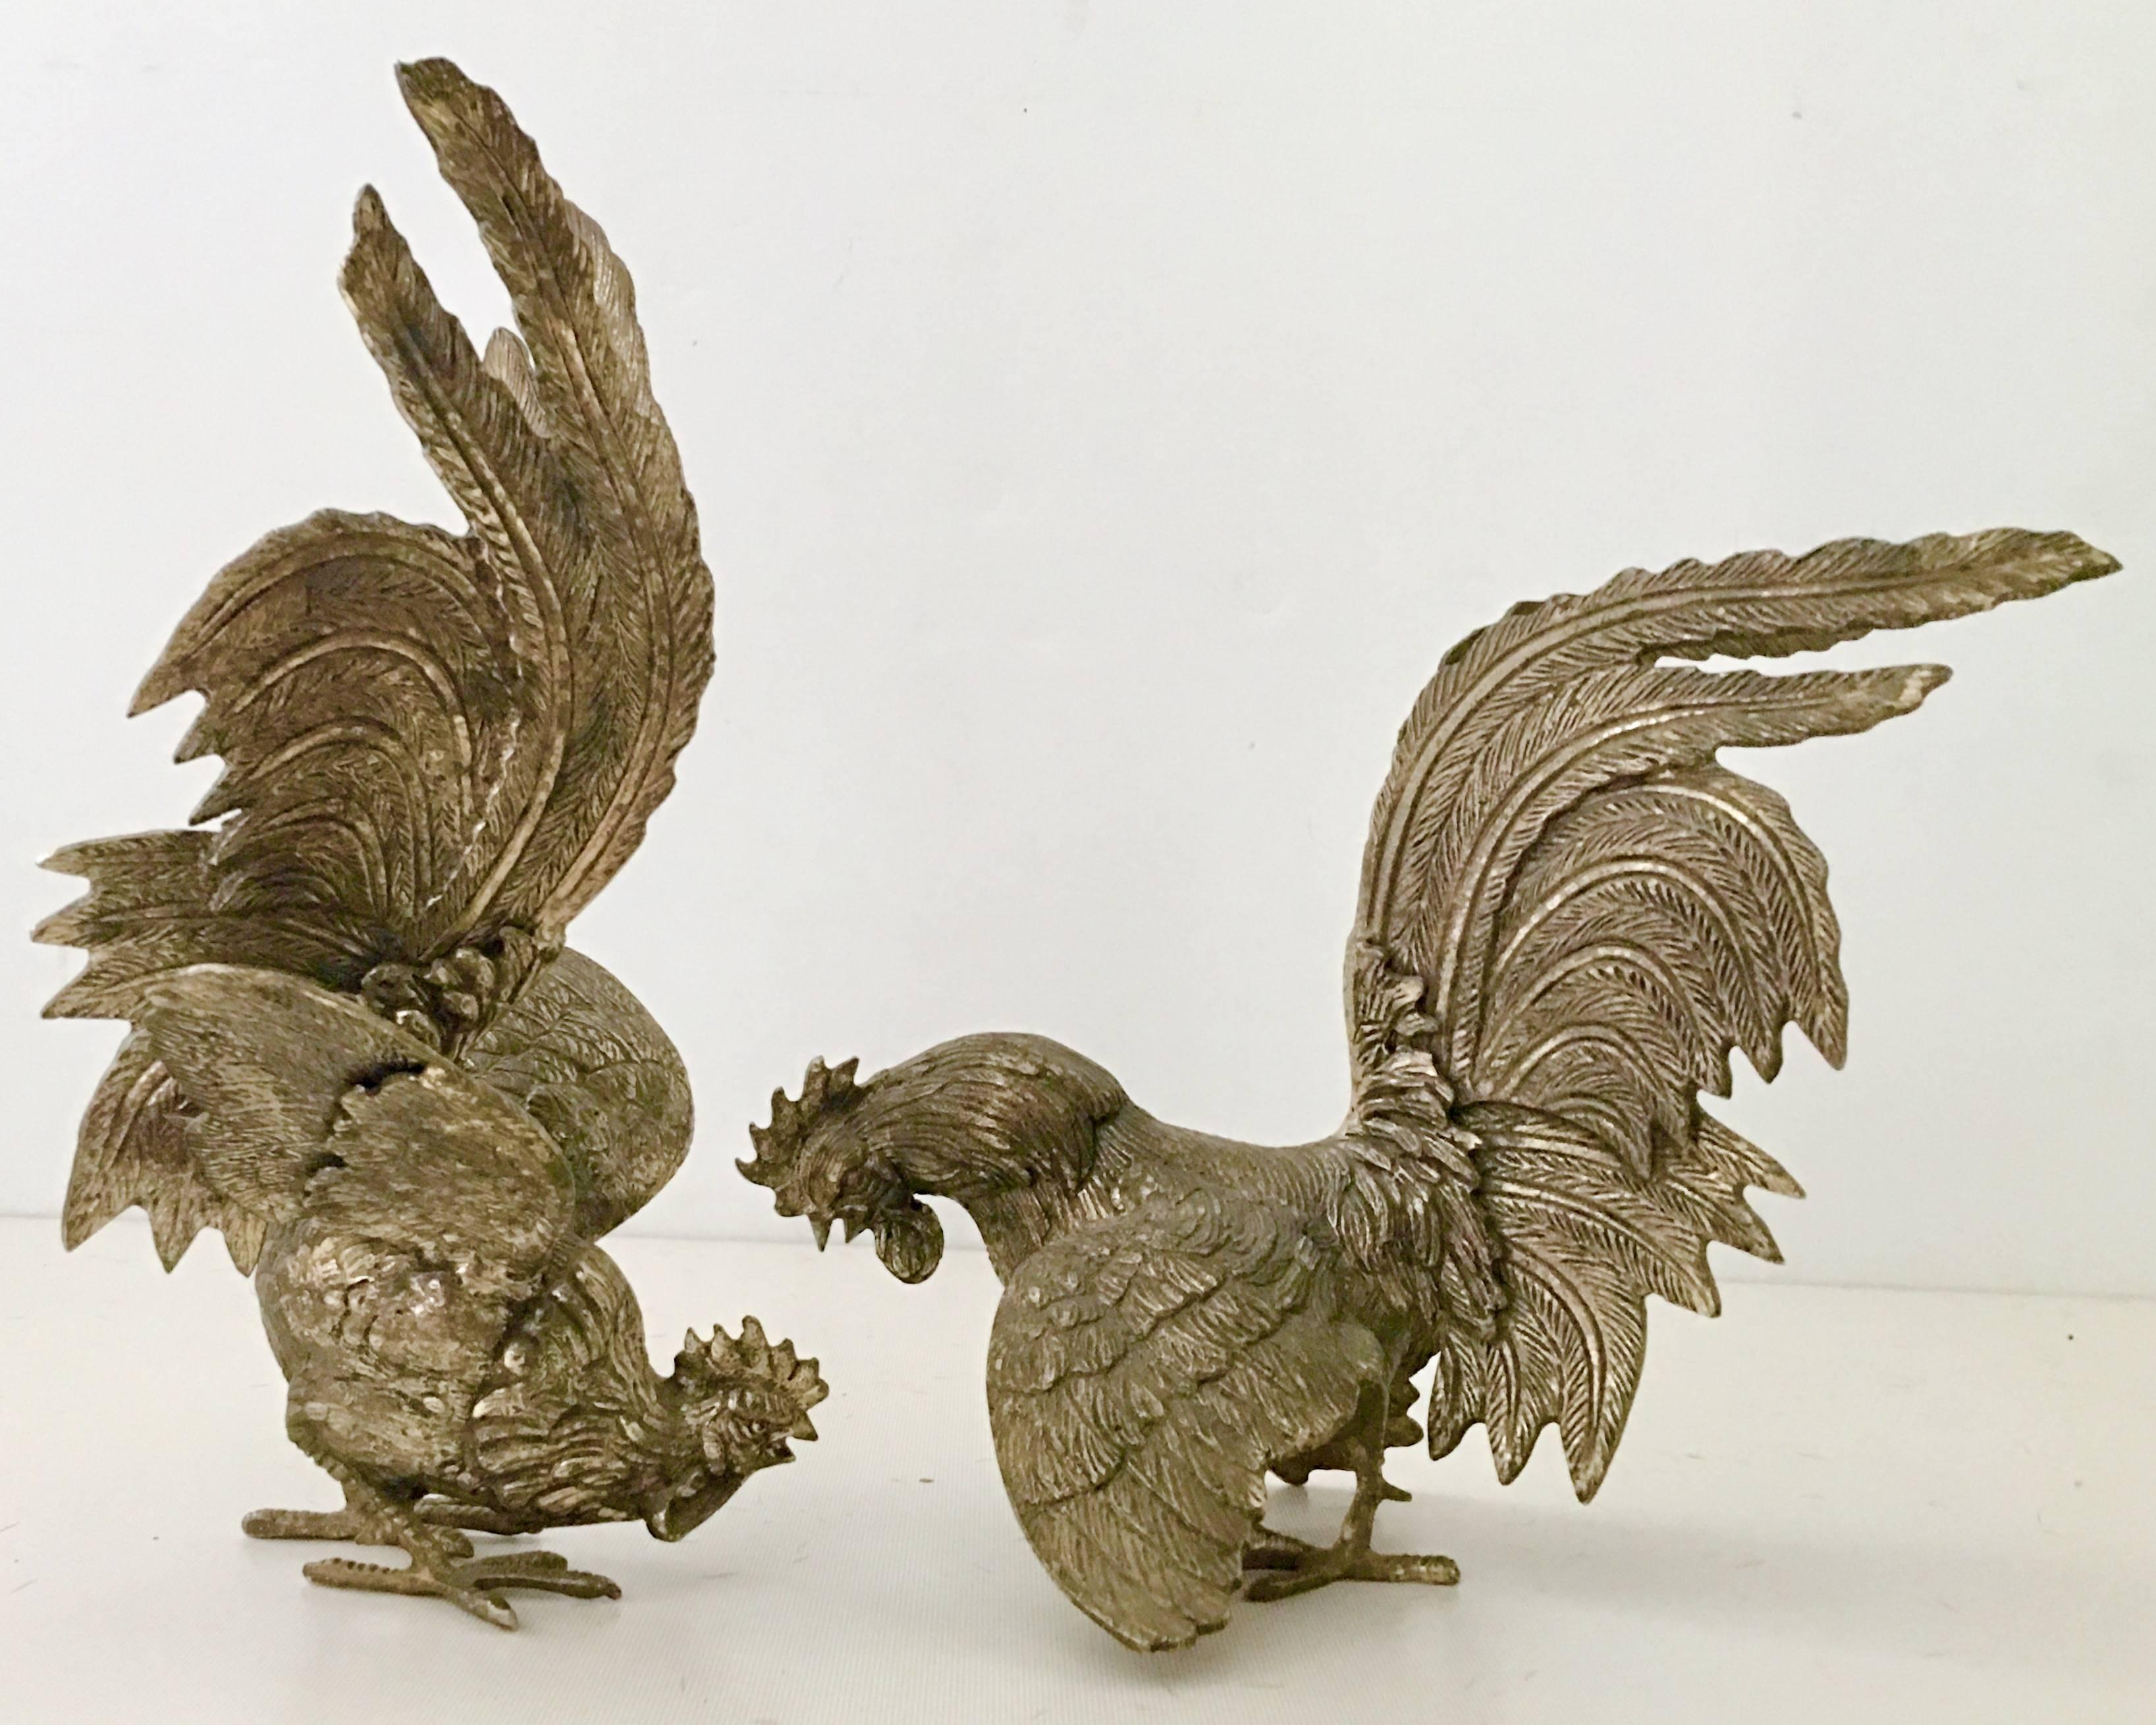 French pair of 19th century silver plate over solid brass "Fighting" cockerels/roosters. Hand chased and amazing attention to detail in creating the "in motion" state. This pair of cockerels are in the patina state and can be